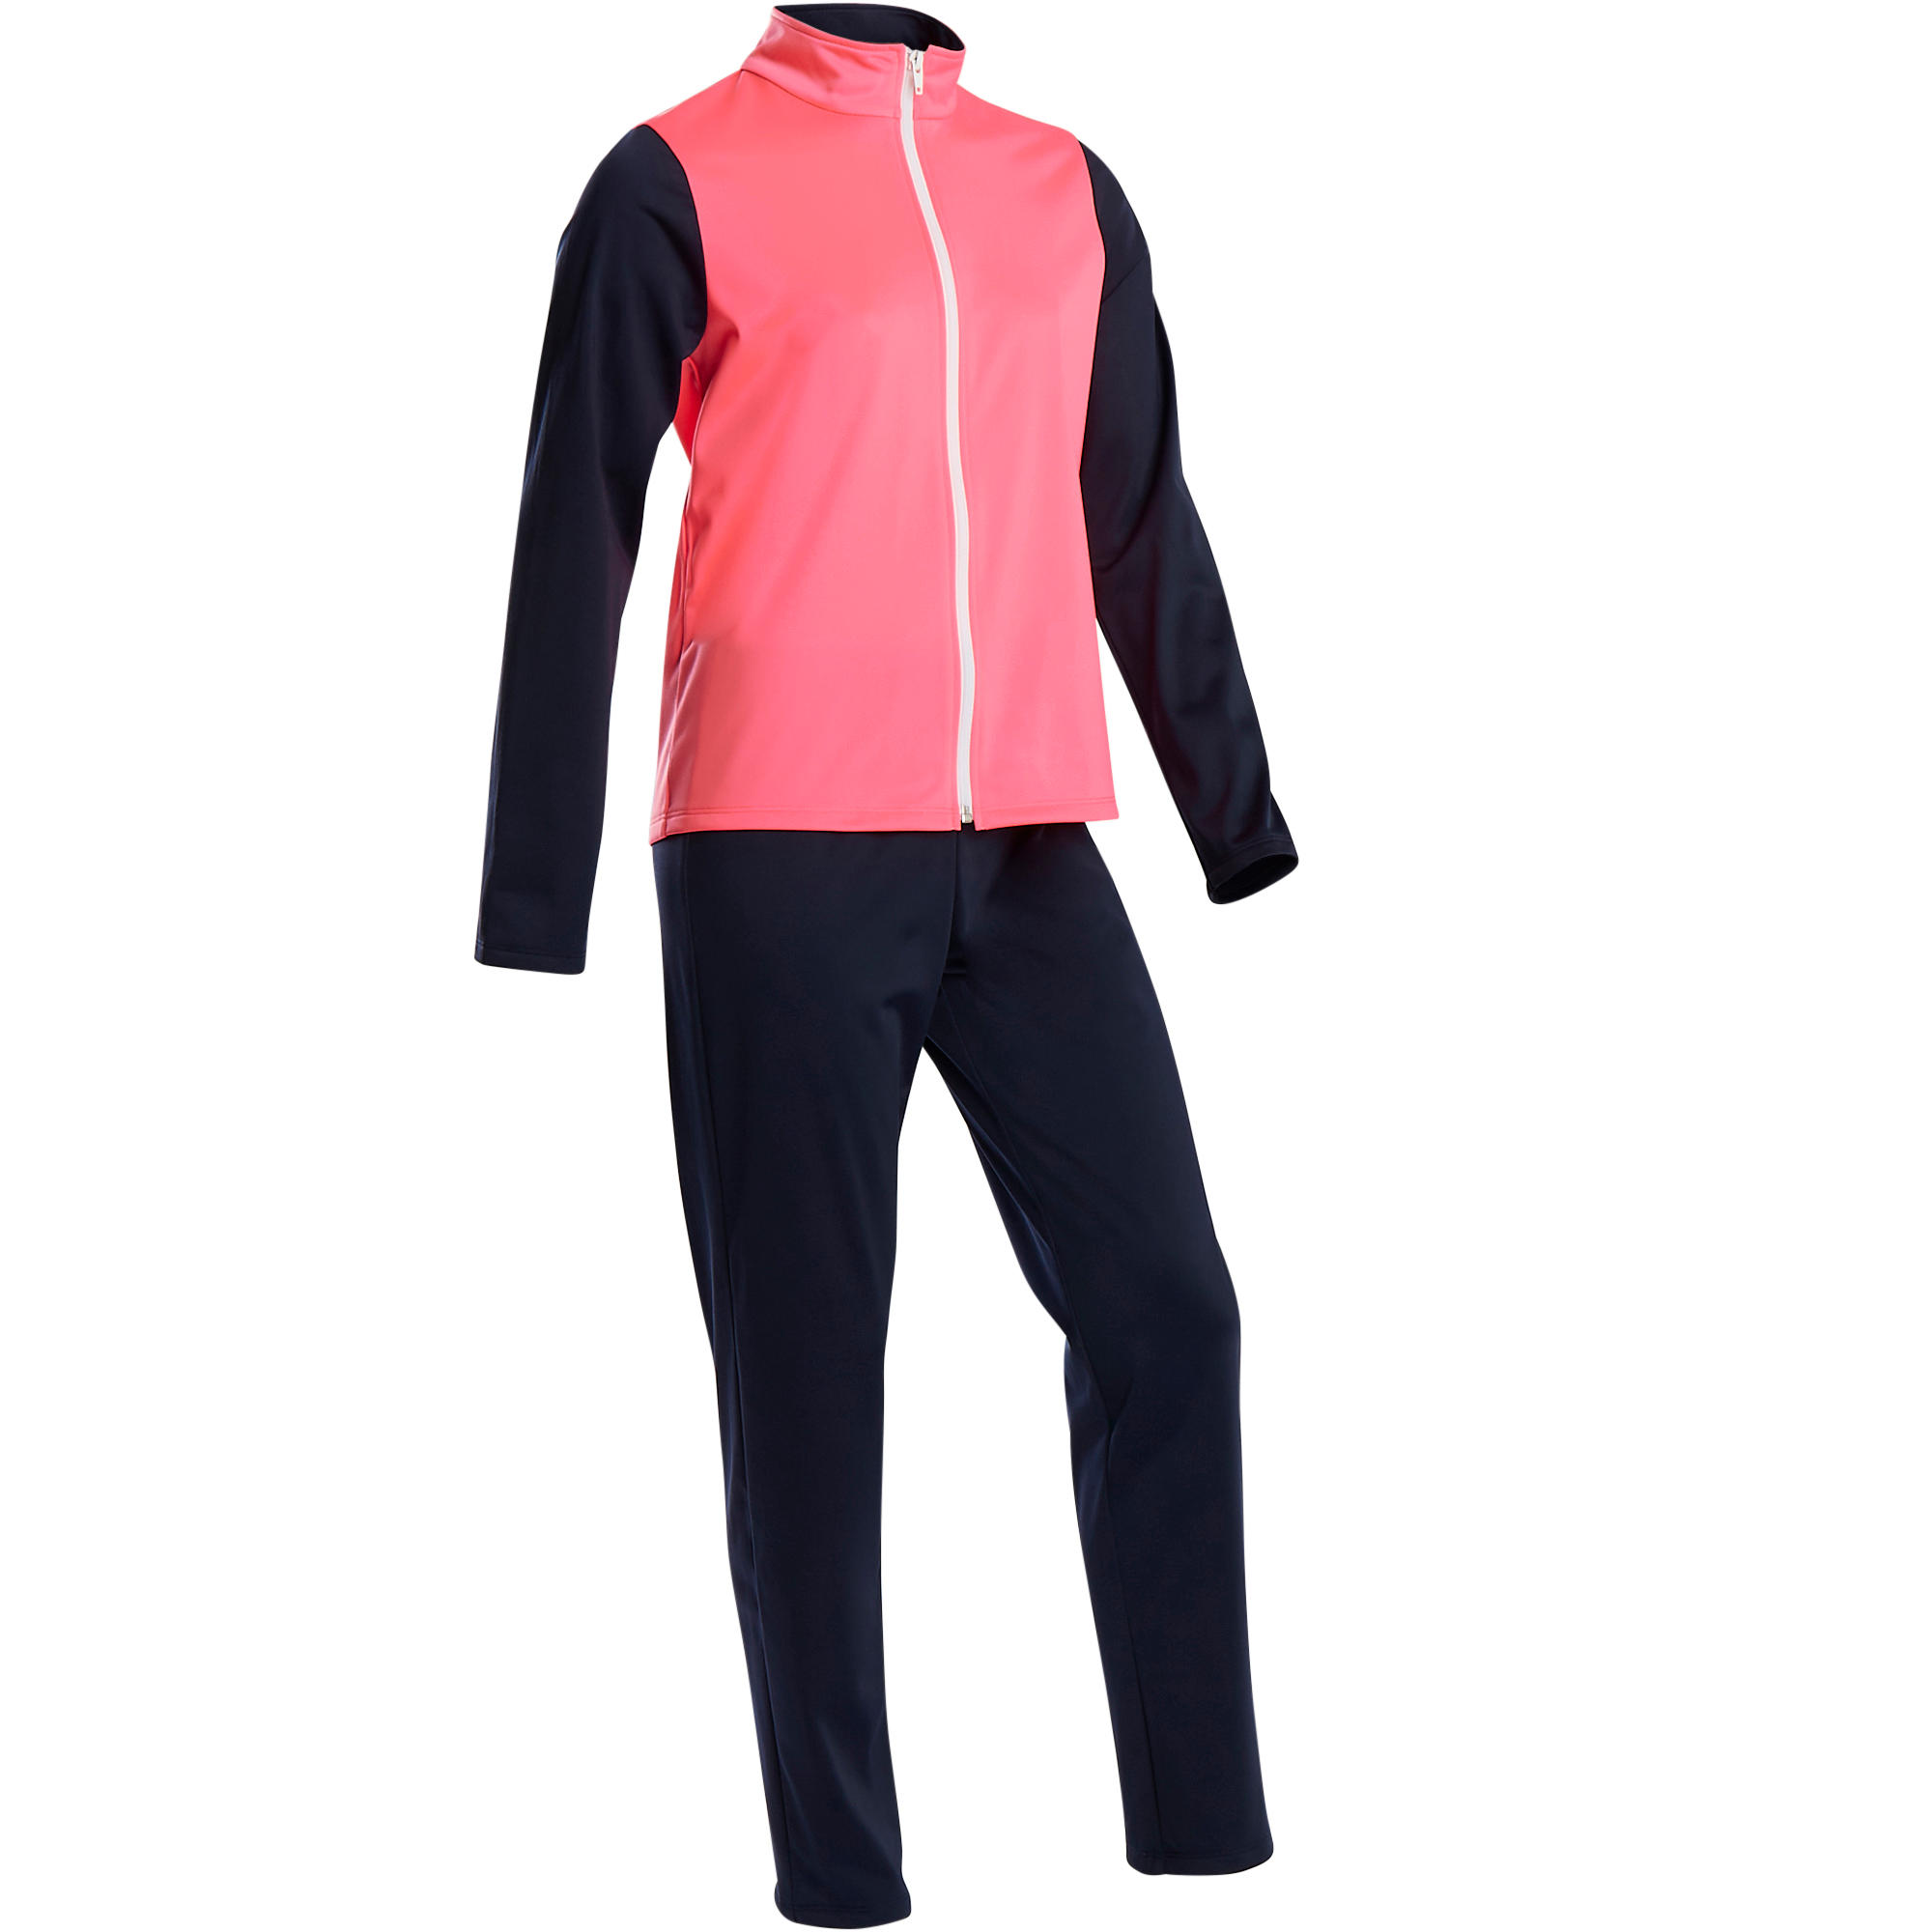 DOMYOS S500 Gym'y Girls' Warm Breathable Synthetic Gym Tracksuit - Pink